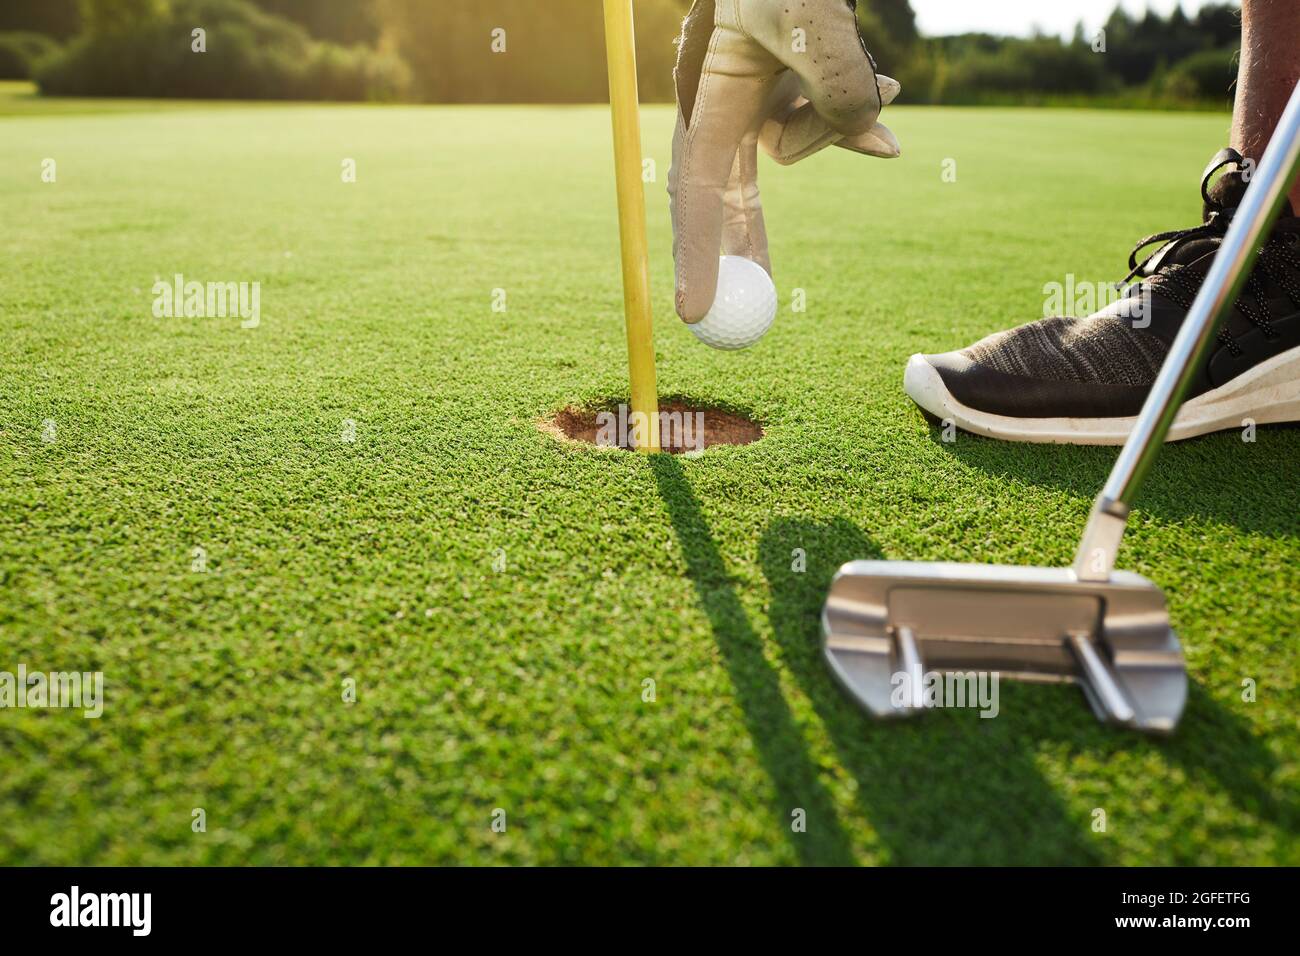 Golfer takes out golf ball from hole in golf course after successful hit using putter, in a sunny day outdoor Stock Photo